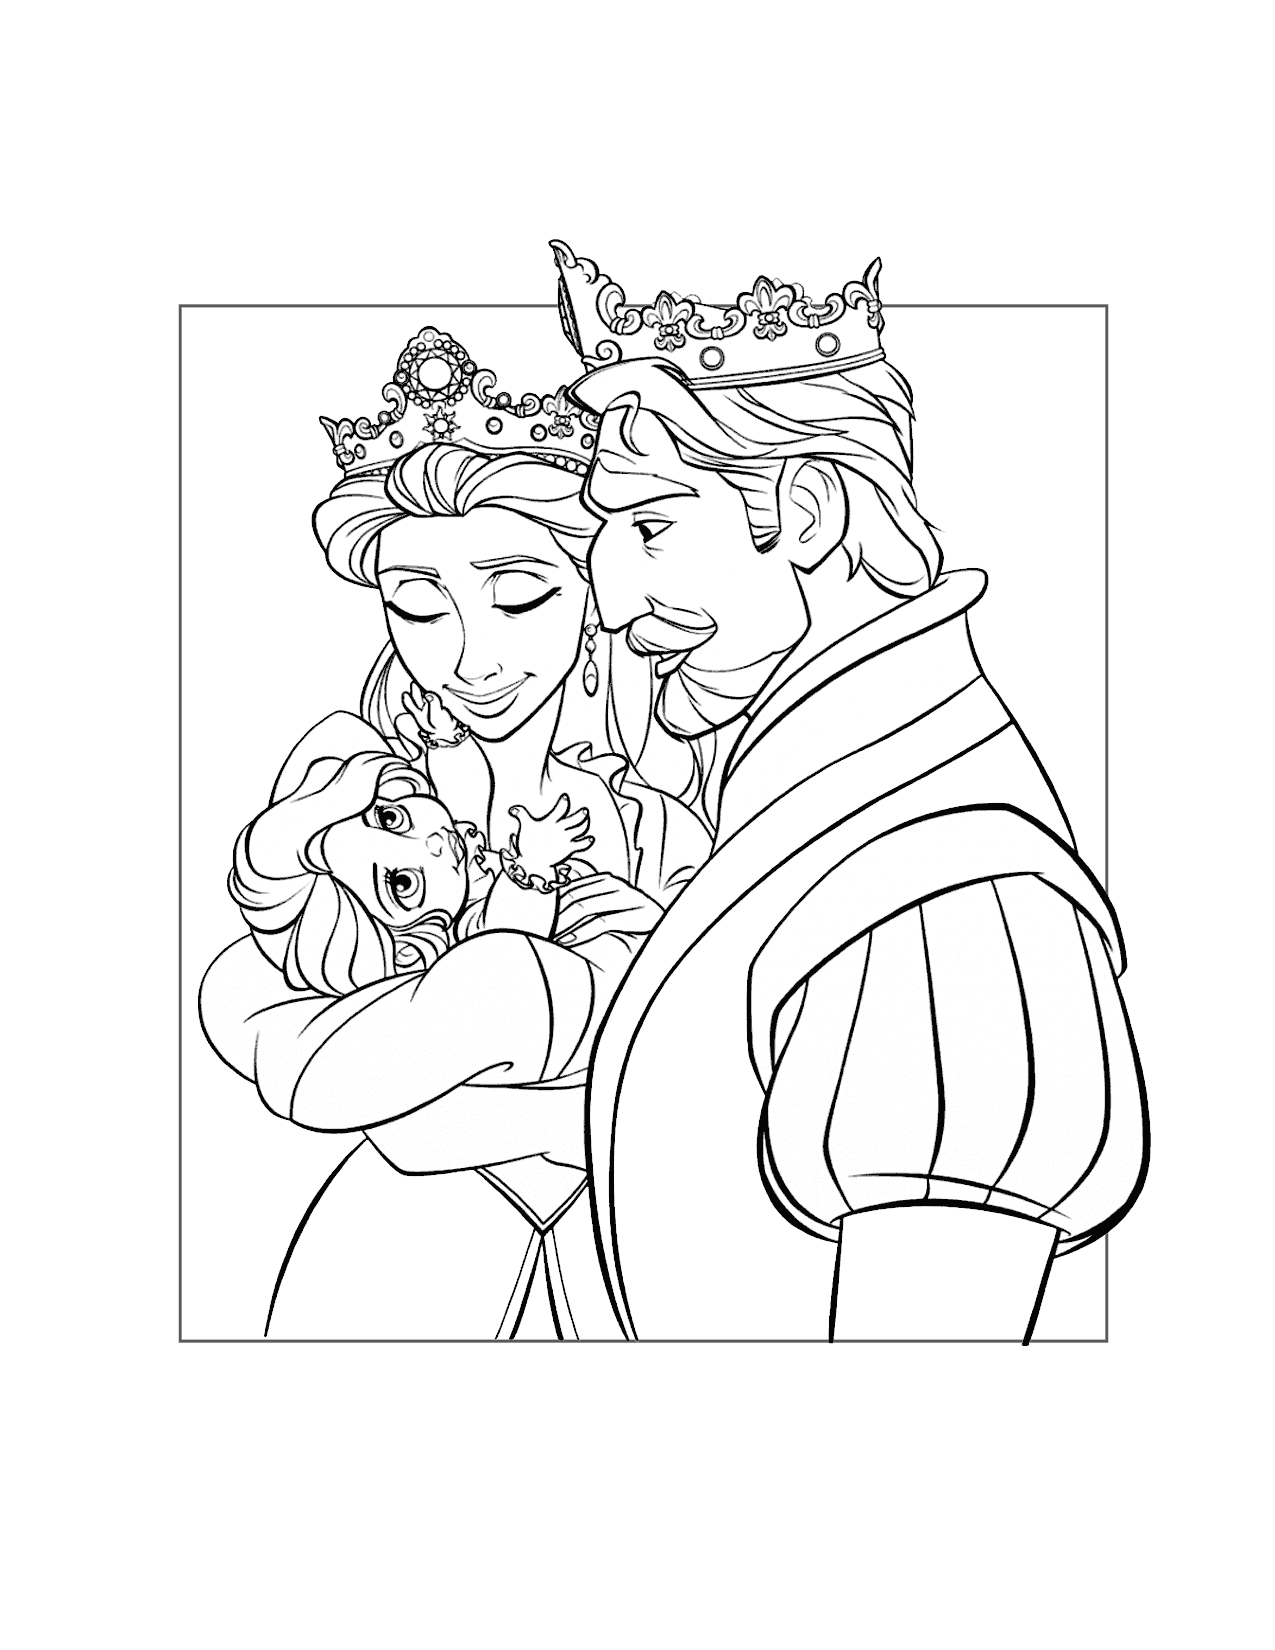 Baby Rapunzel Coloring Page